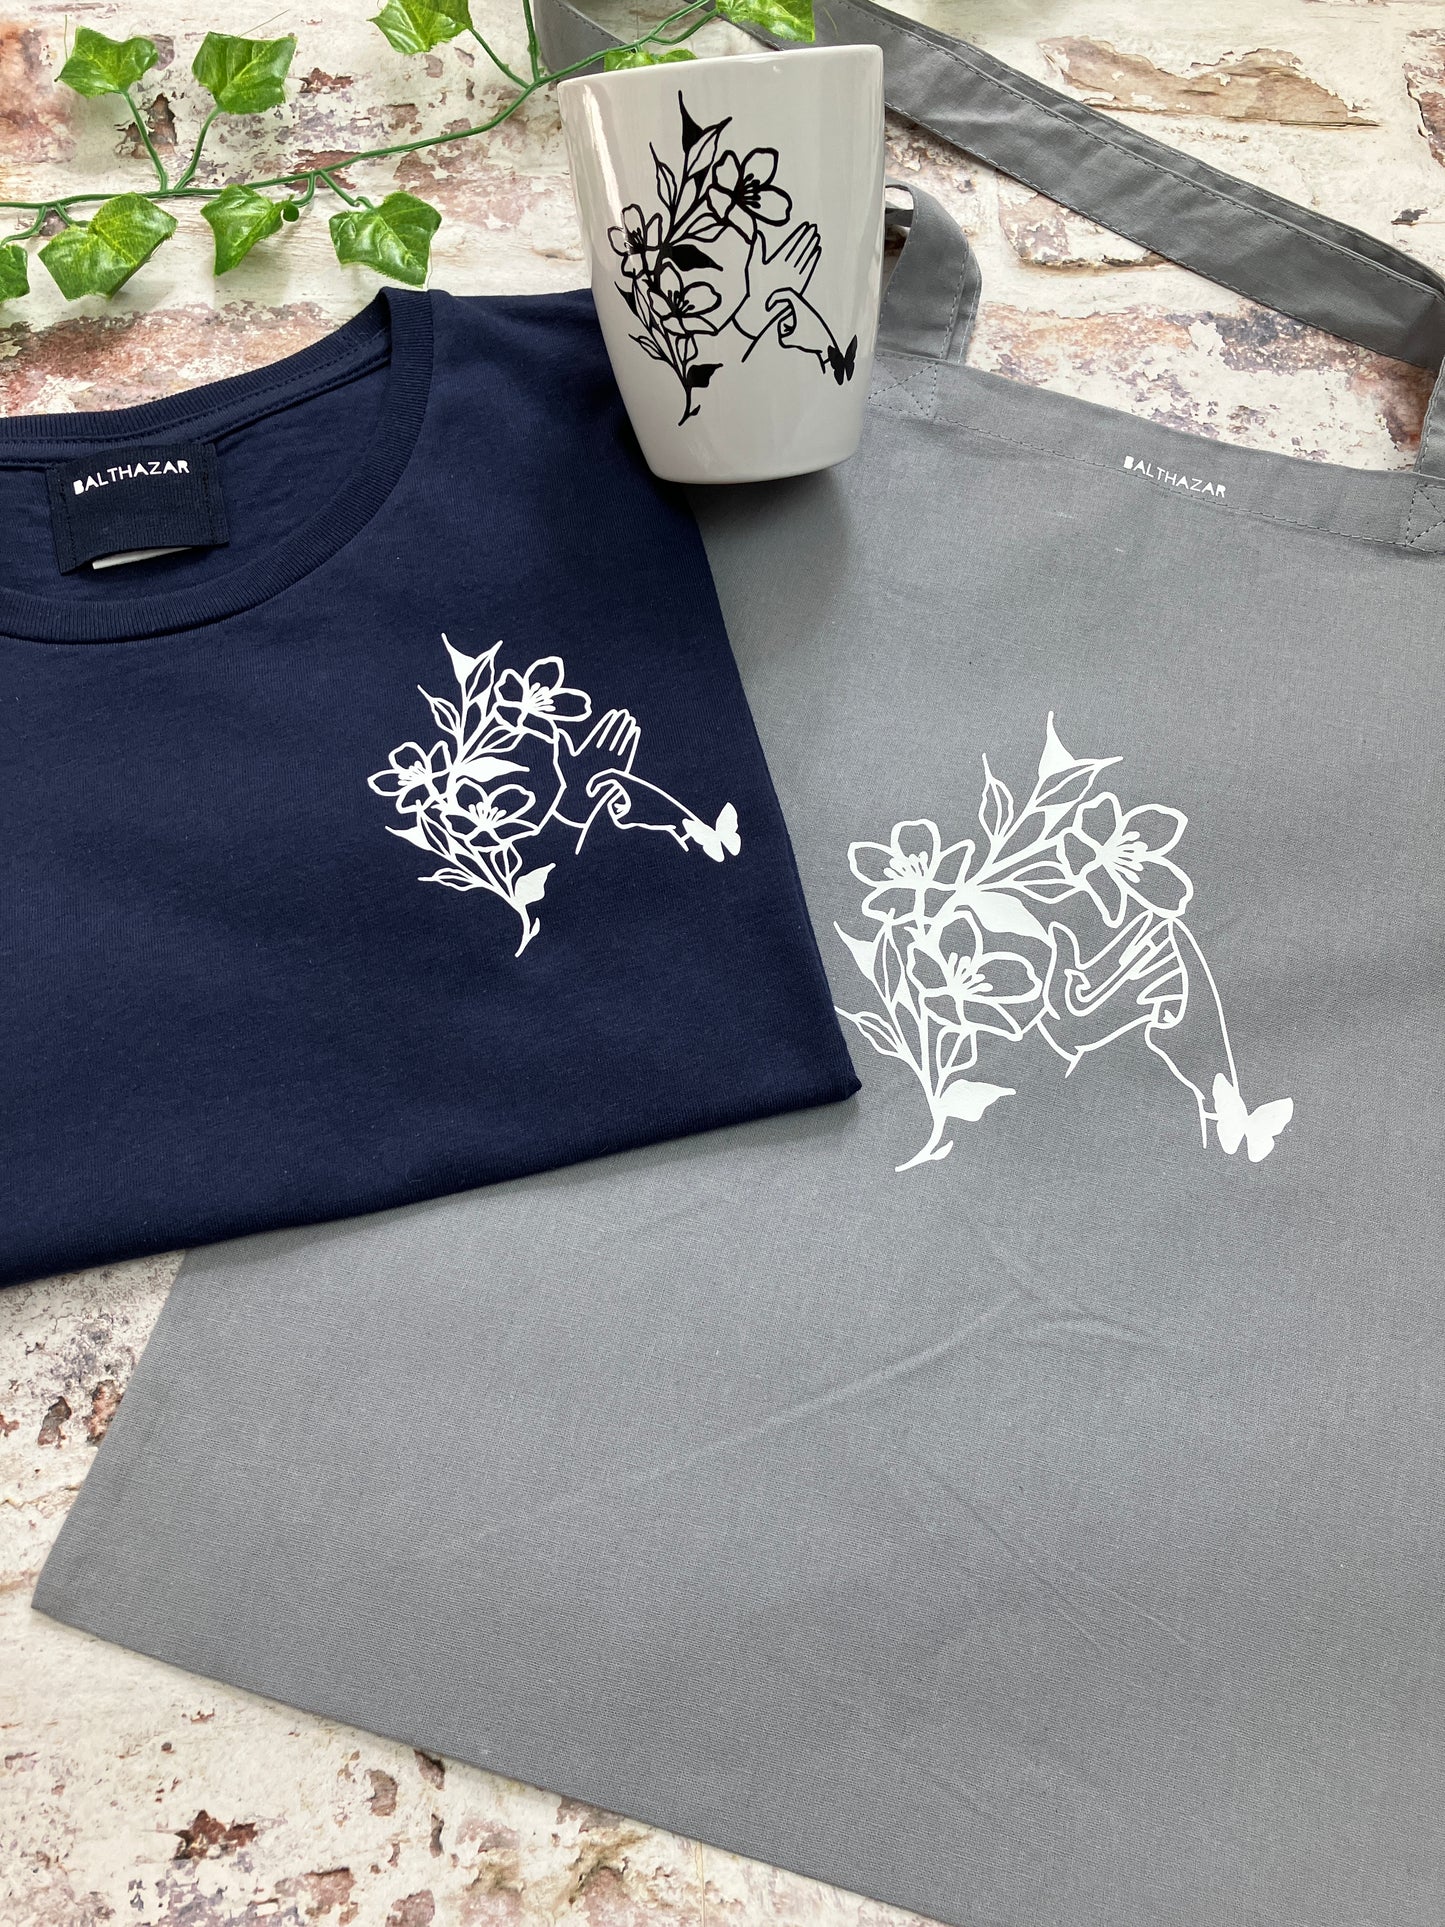 BSL Floral Initial custom t-shirt - sign language